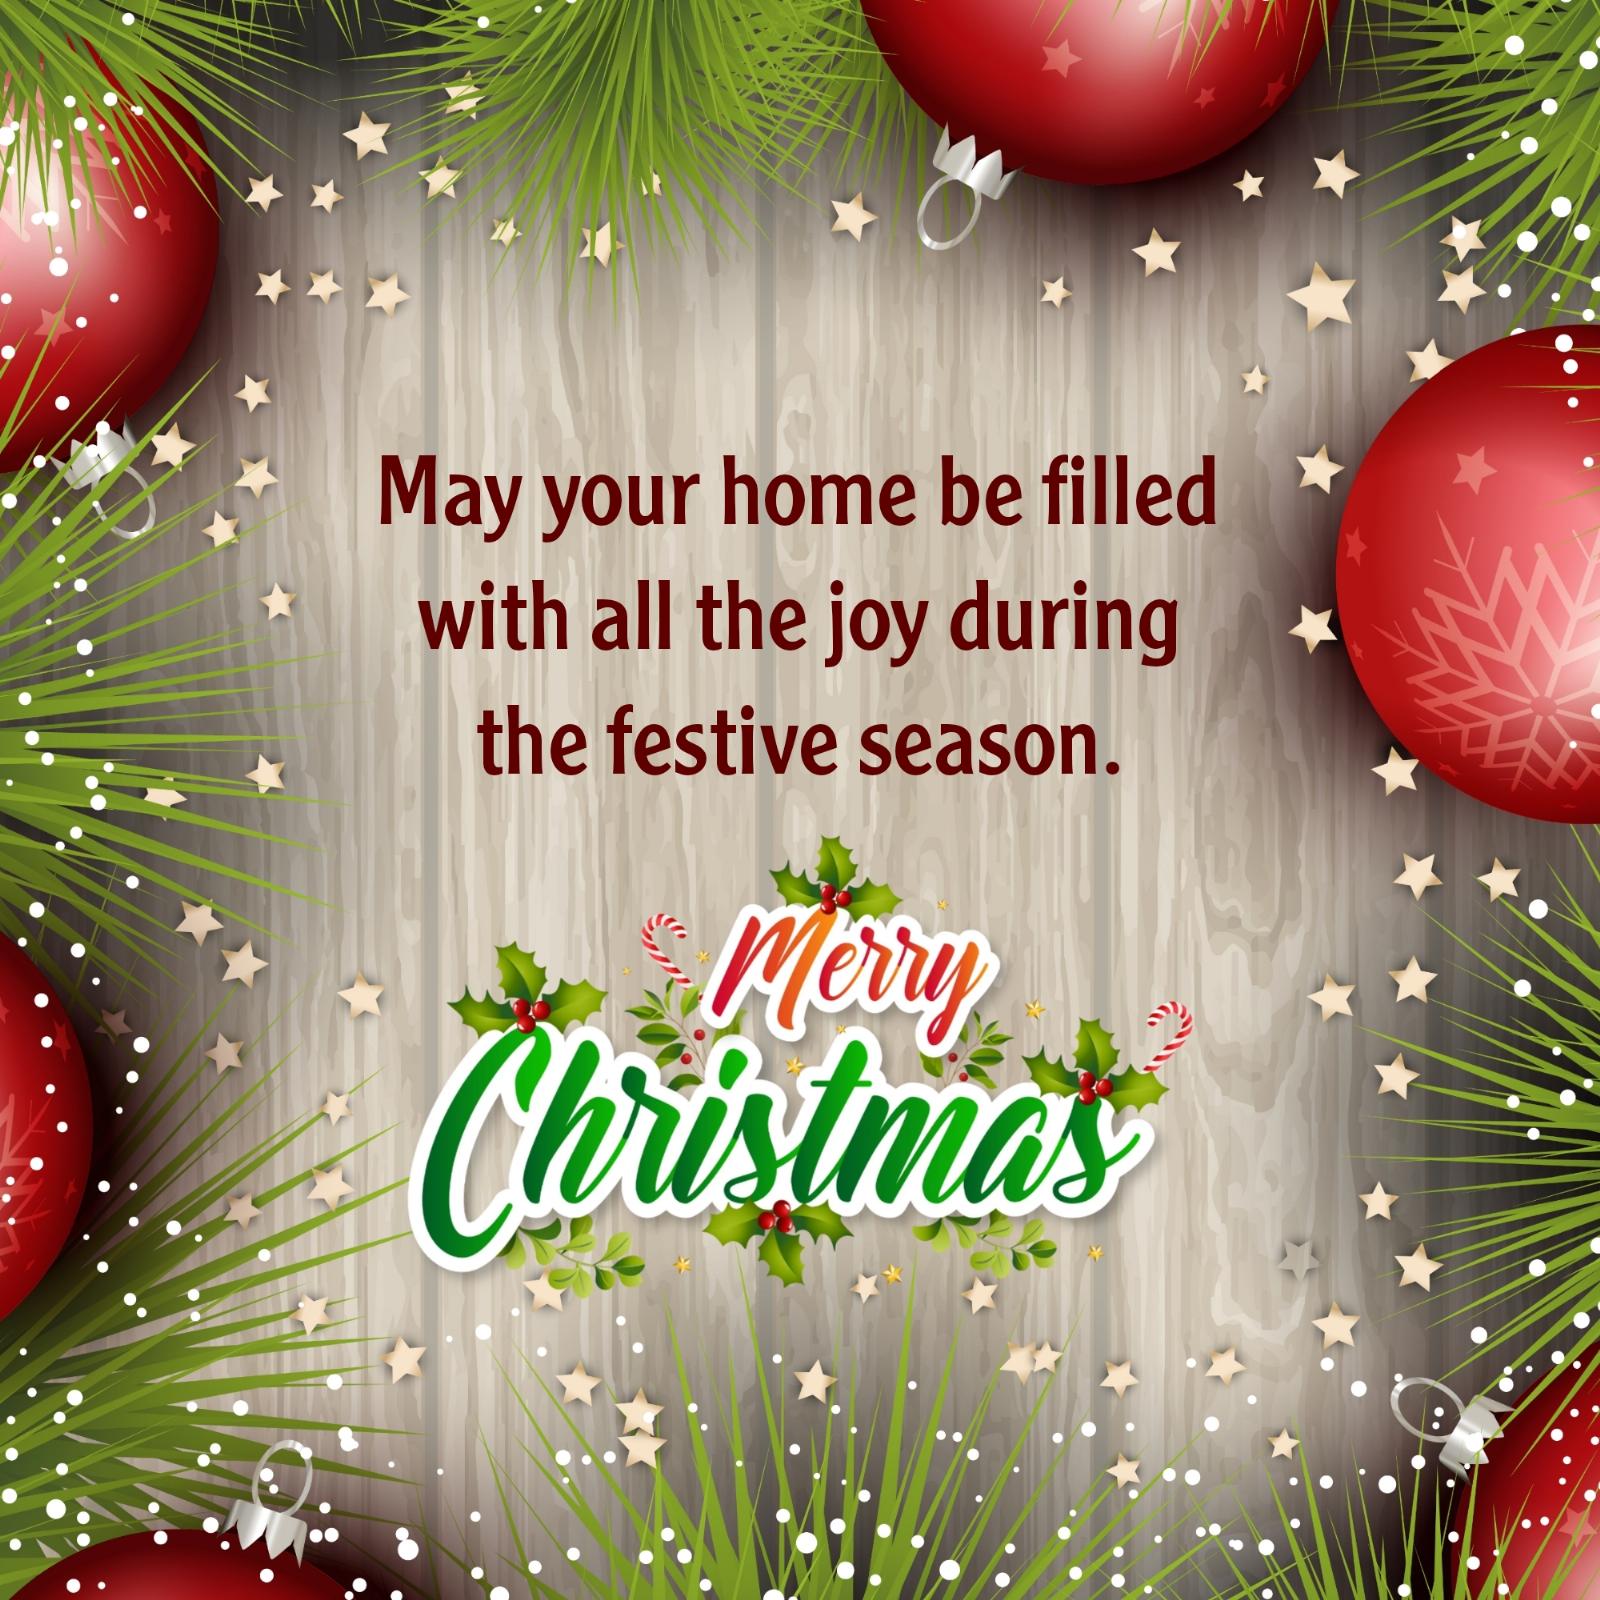 May your home be filled with all the joy